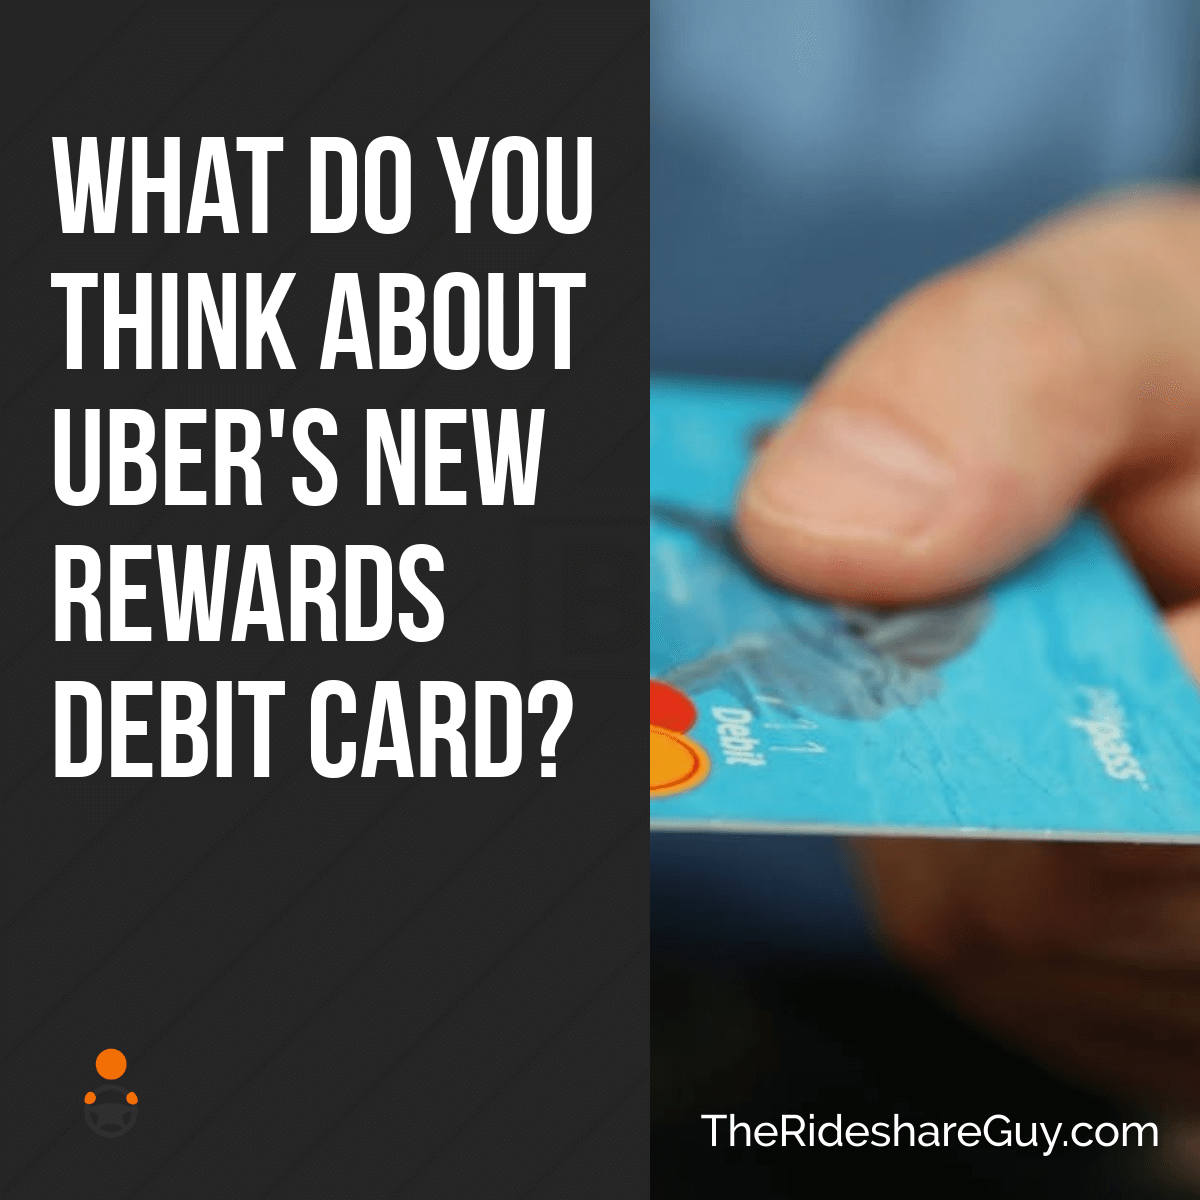 Have you heard about Uber’s new Rewards Debit Card? If not, we’ve got you covered. We cover what the debit card is, what its benefits are, and if it’s good for drivers -